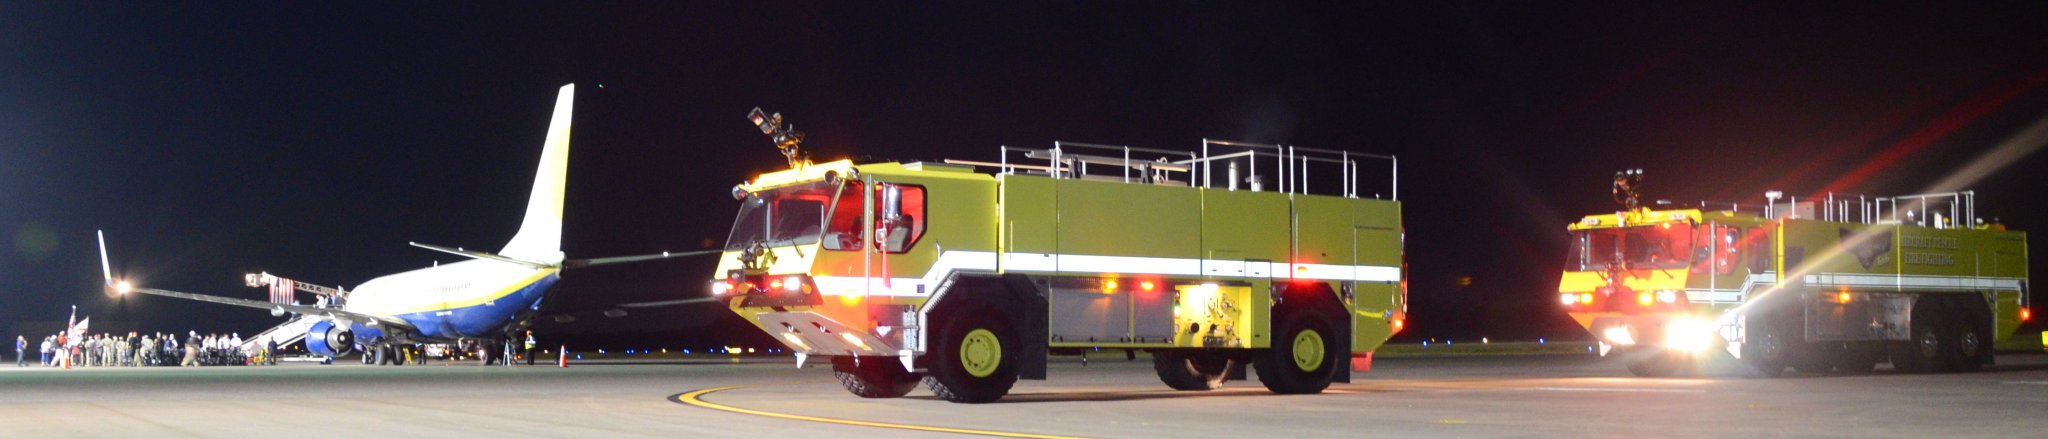 Pictures of ARFF vehicle production 021.jpg